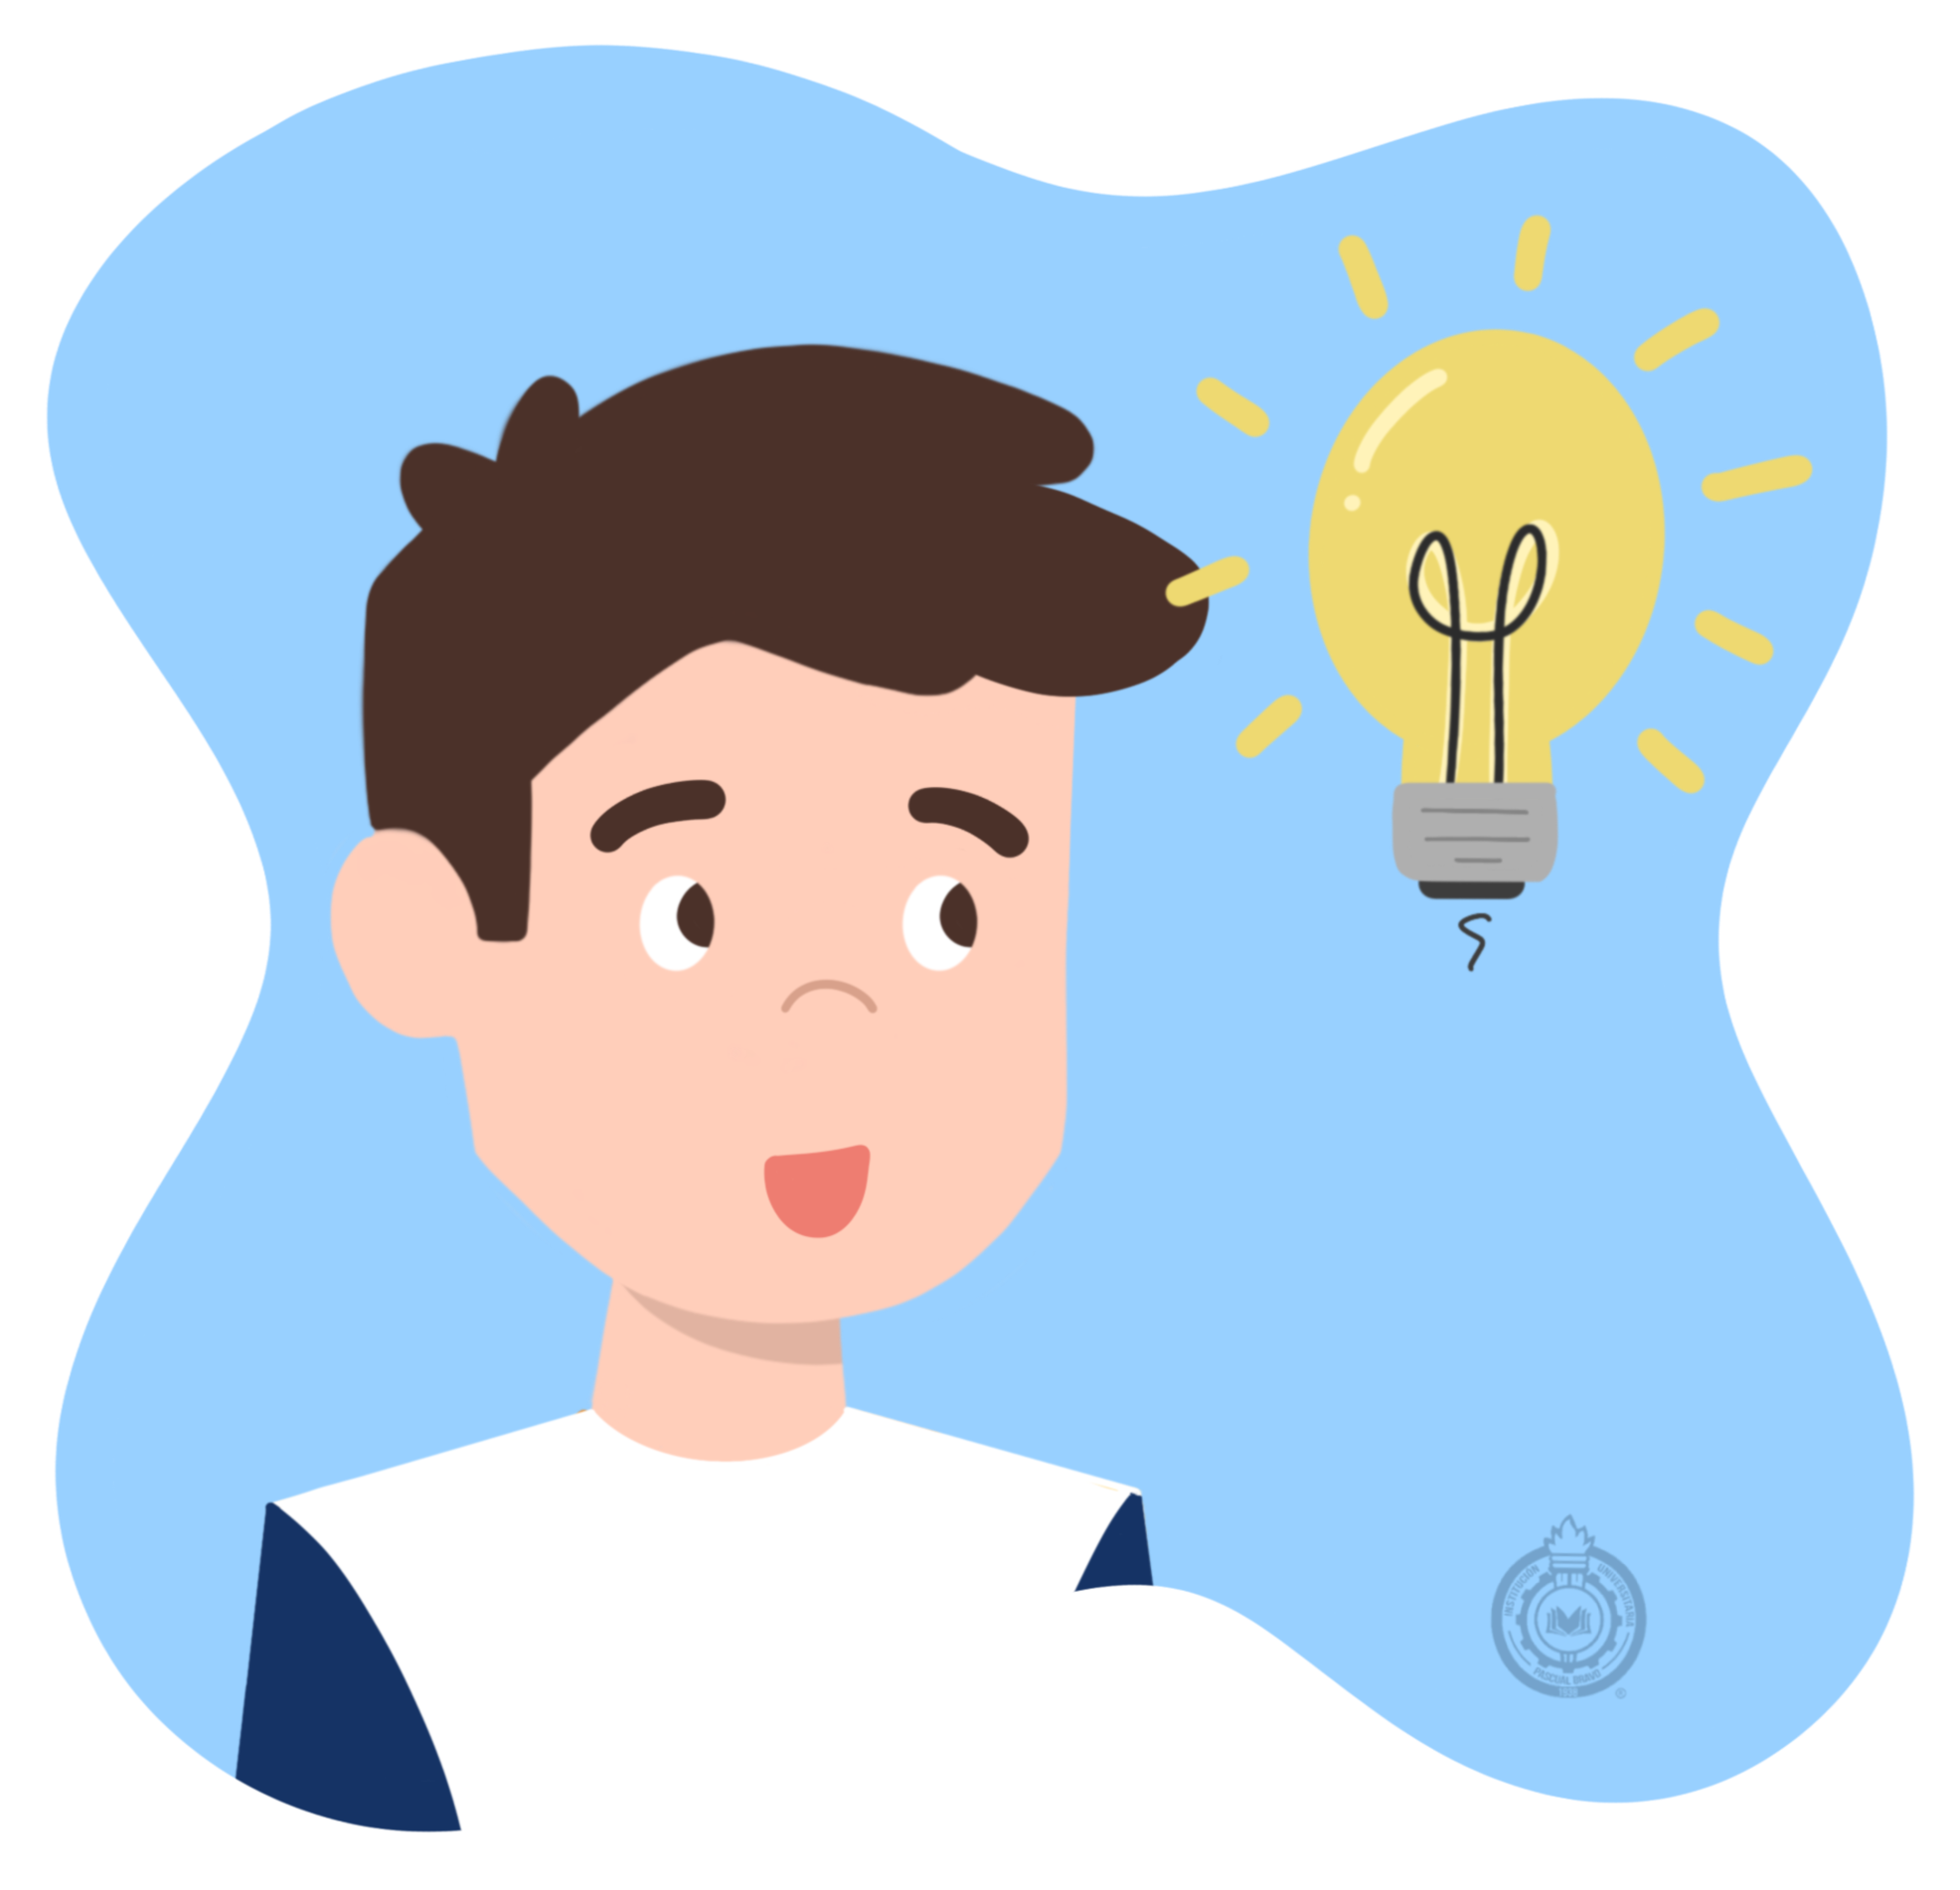 Thinking PNG - Thinking Emoji, Man Thinking, Woman Thinking, Person Thinking,  Thinking Cartoon, Thinking People, Boy Thinking, Thinking Brain, Thinking  Of You, Thinking Smiley Face, Thinking Toys. - CleanPNG / KissPNG